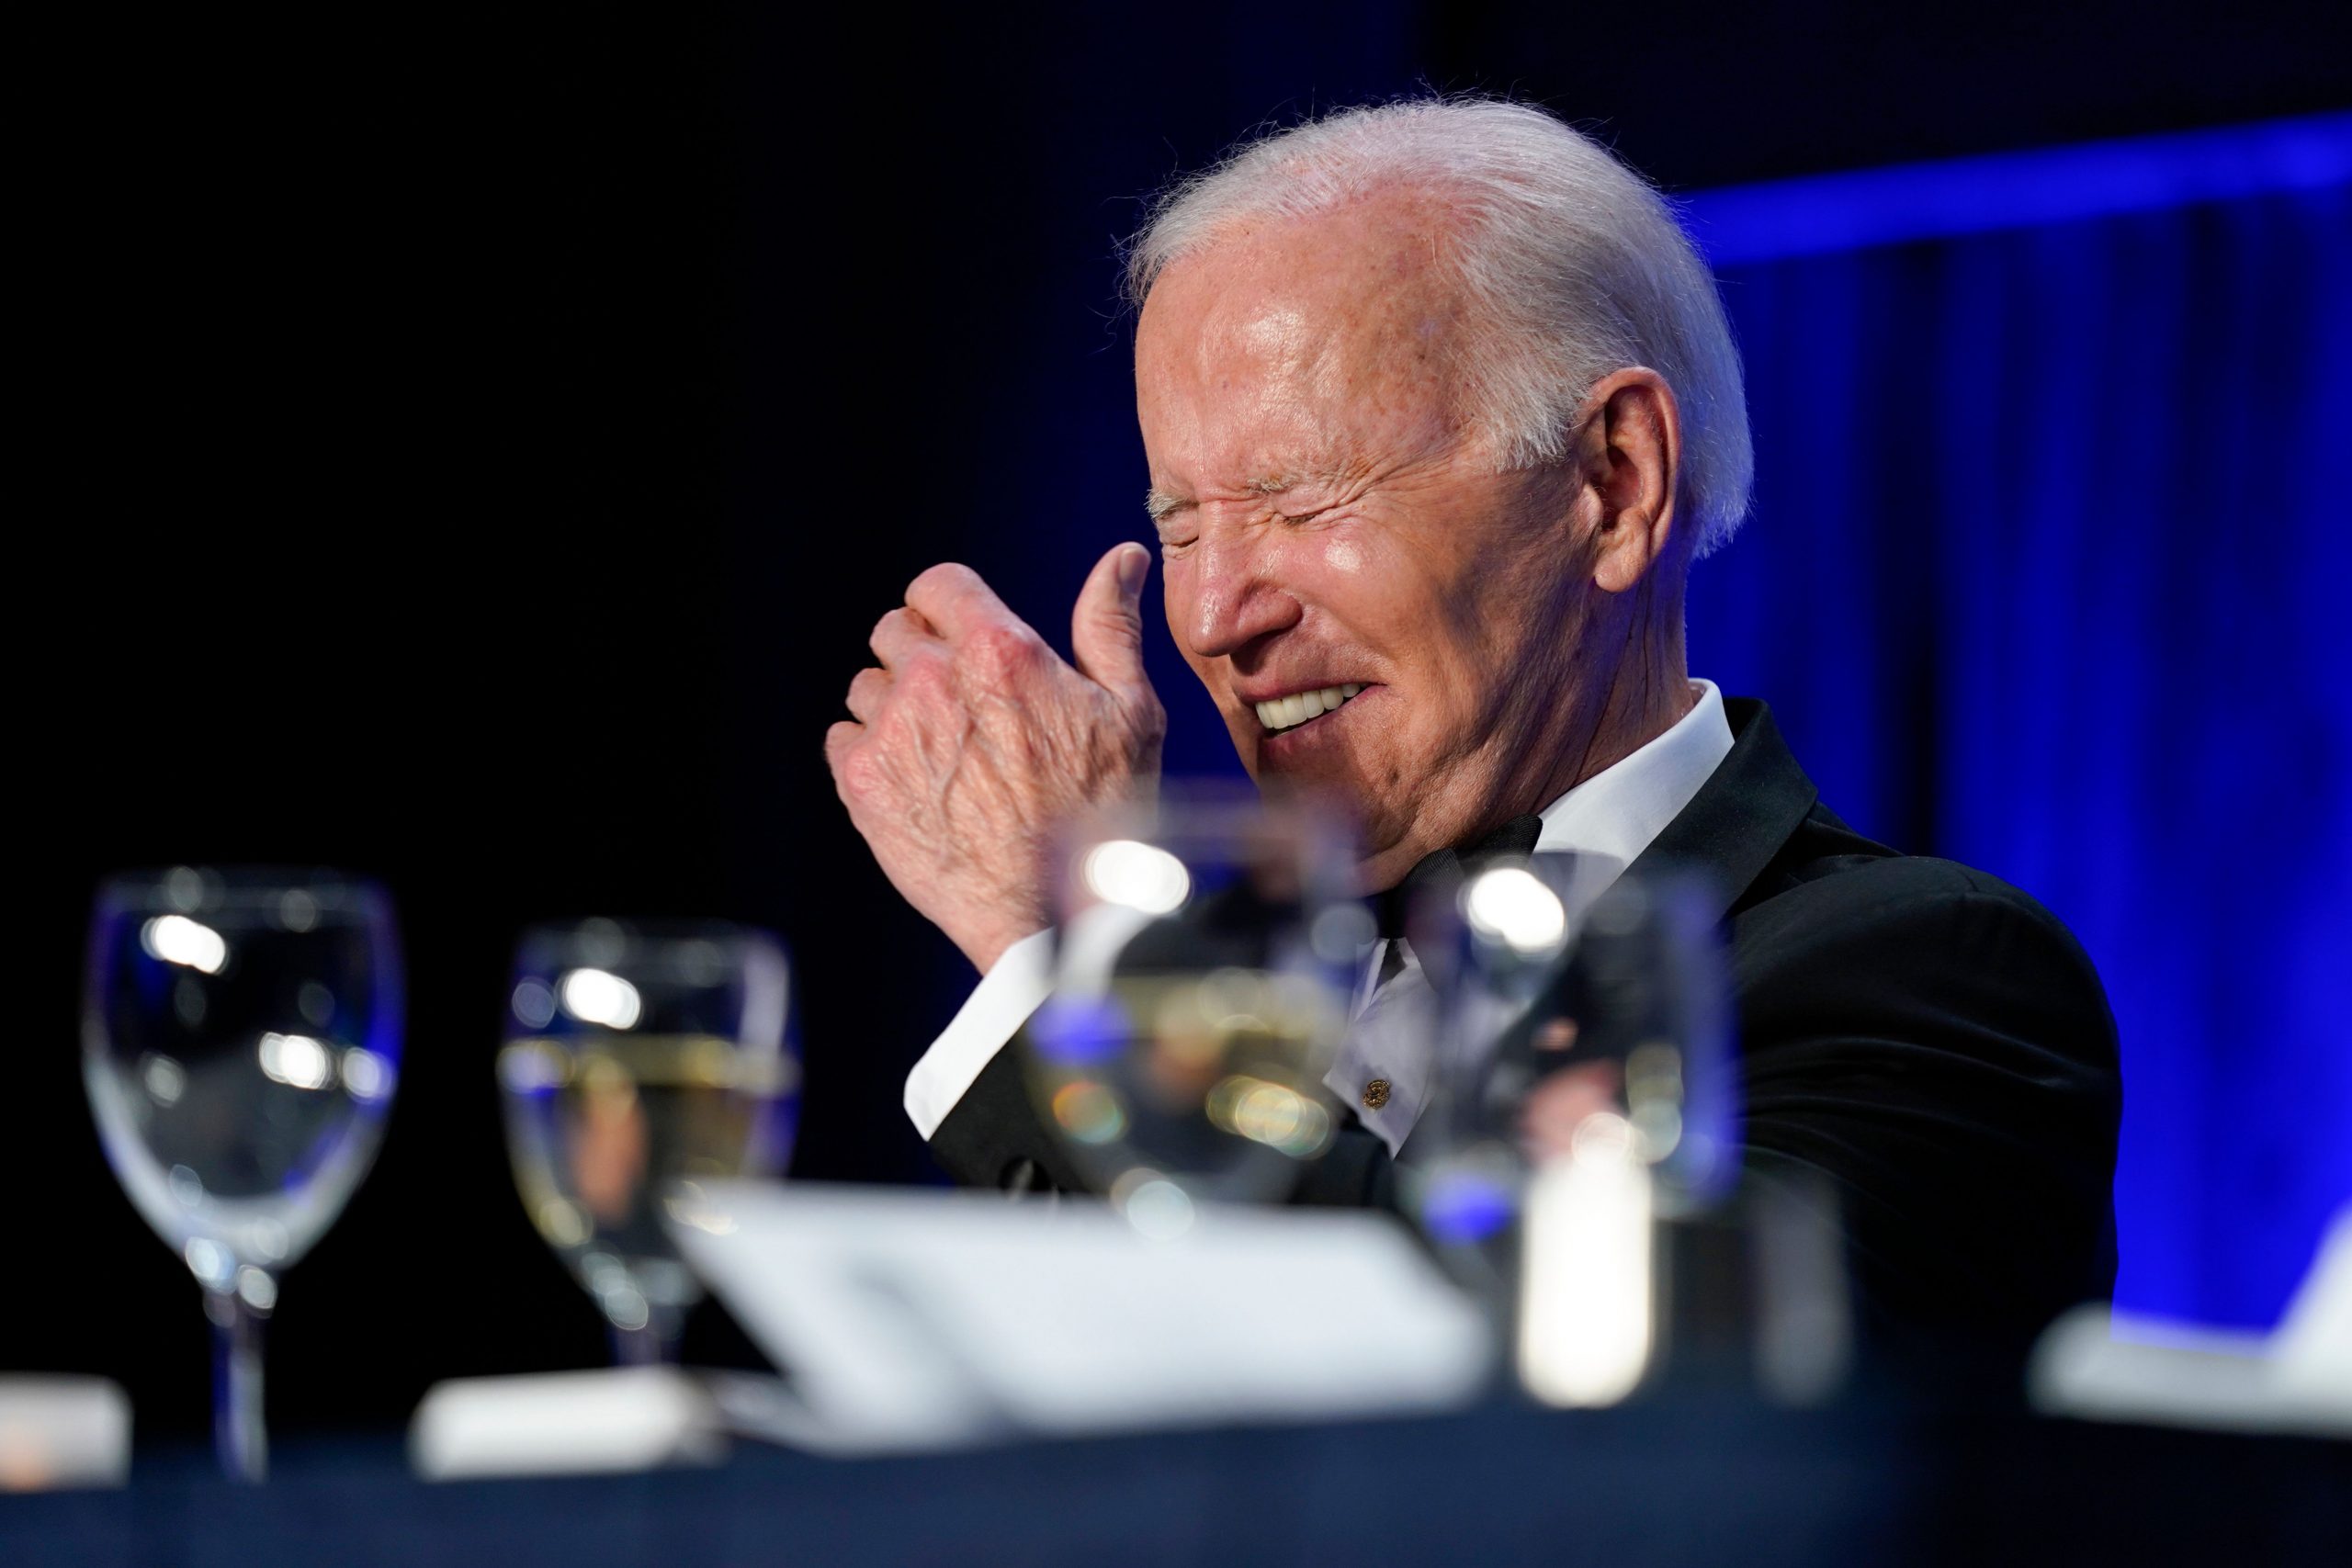 While Joe Biden made his comedy debut at WHCD, GOP was busy with criticism